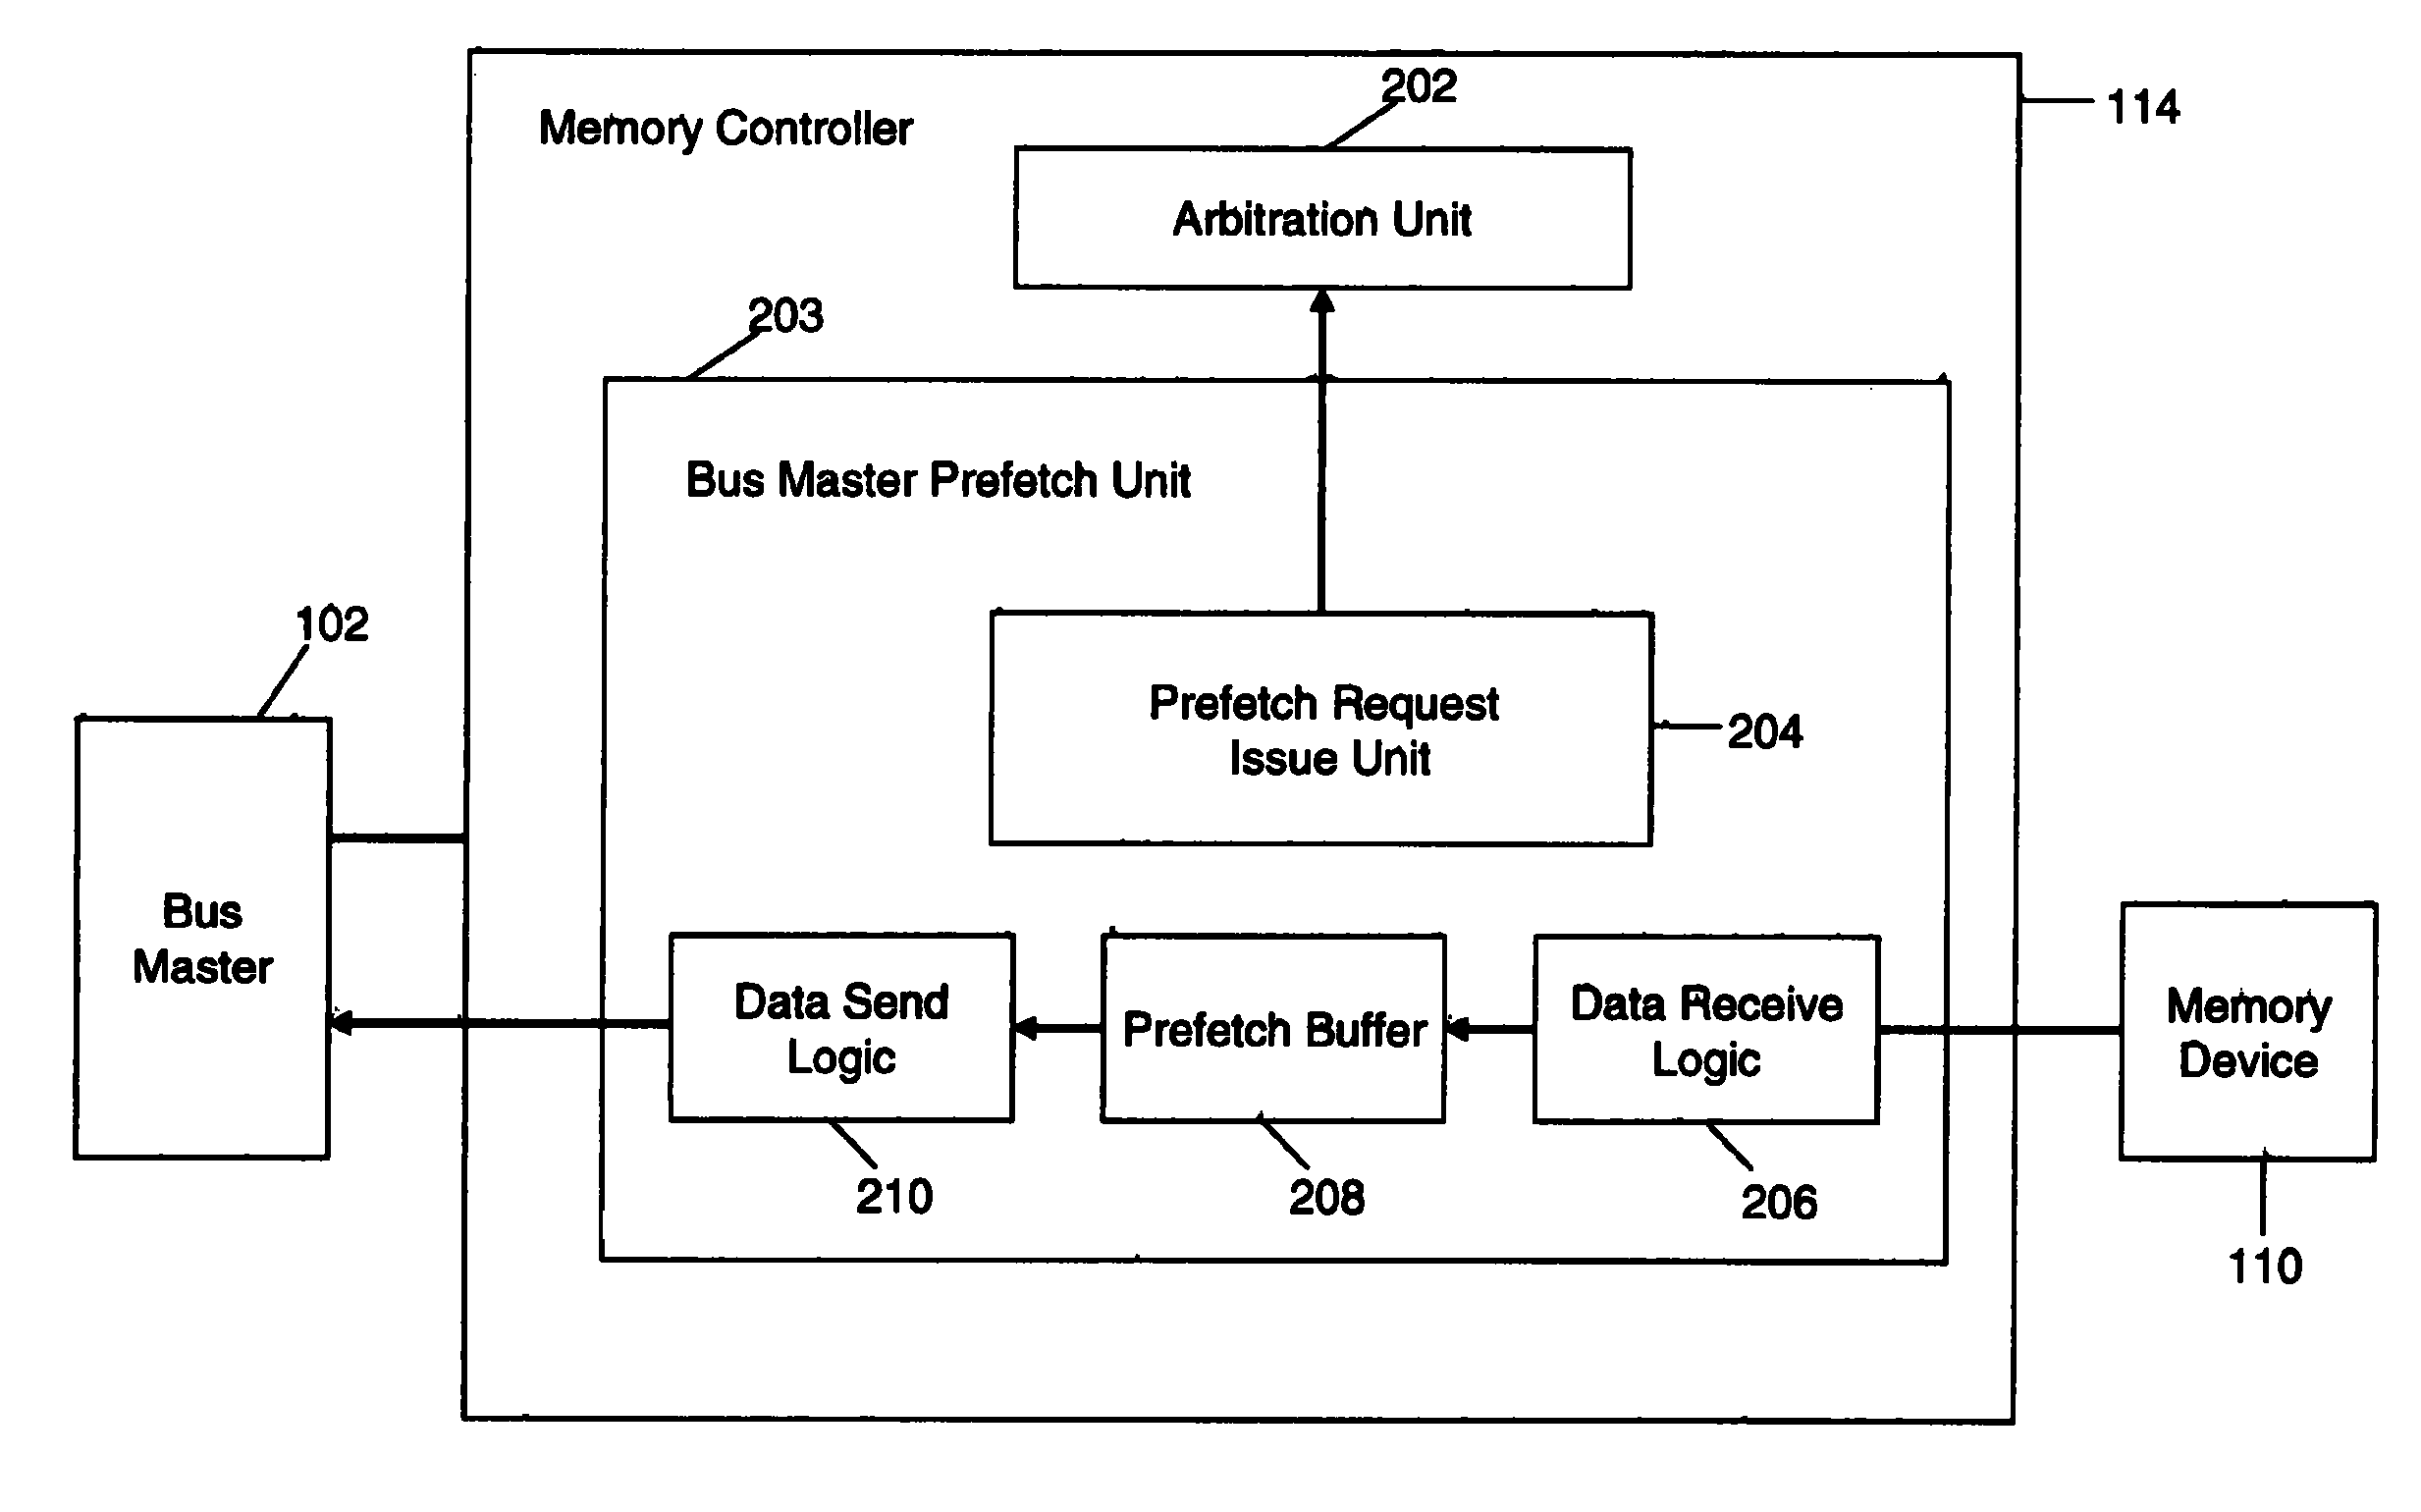 Prefetch mechanism for bus master memory access